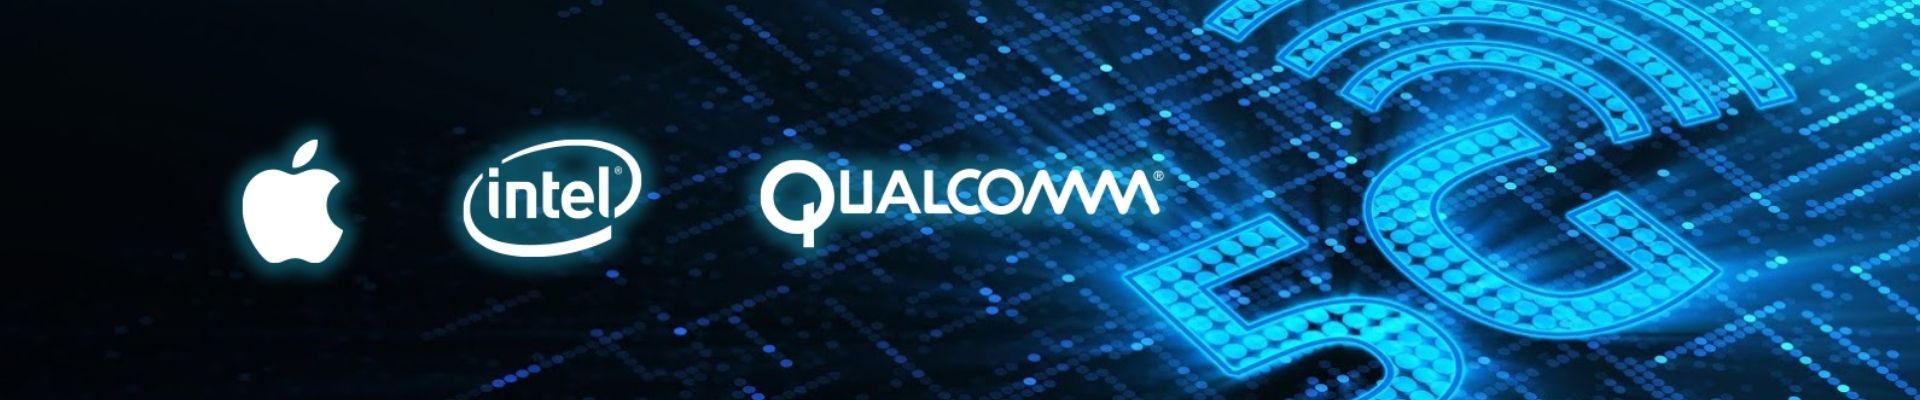 The Story of Intel, Apple, and Qualcomm: Intel Patent Analysis